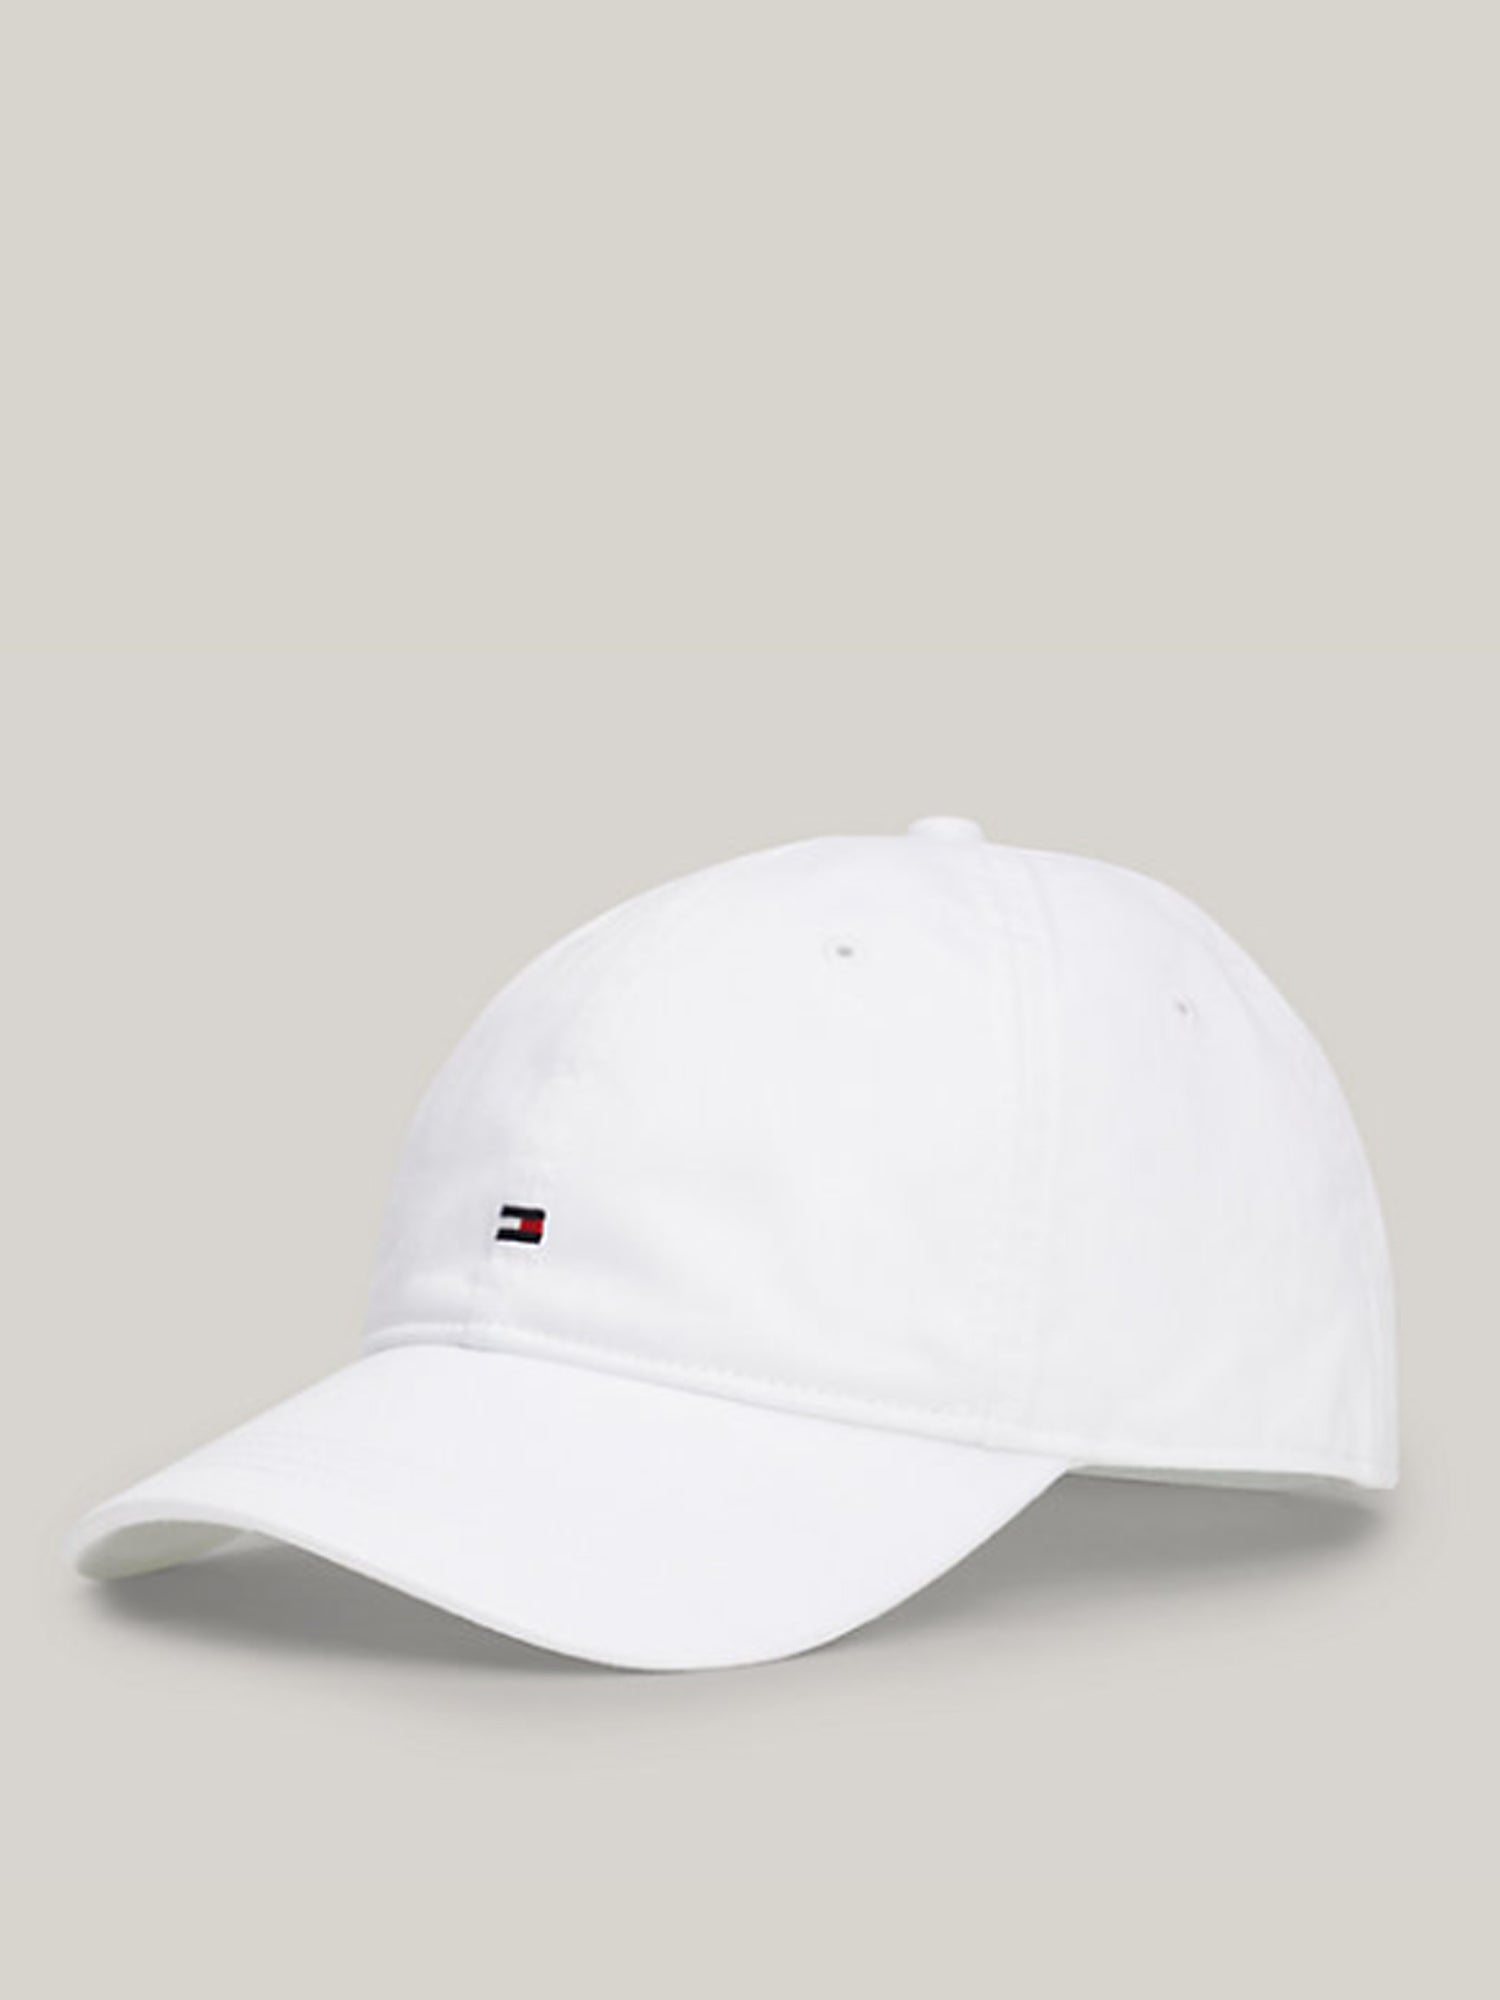 TOMMY HILFIGER ACCESSORIES CAPPELLO BASEBALL BIANCO